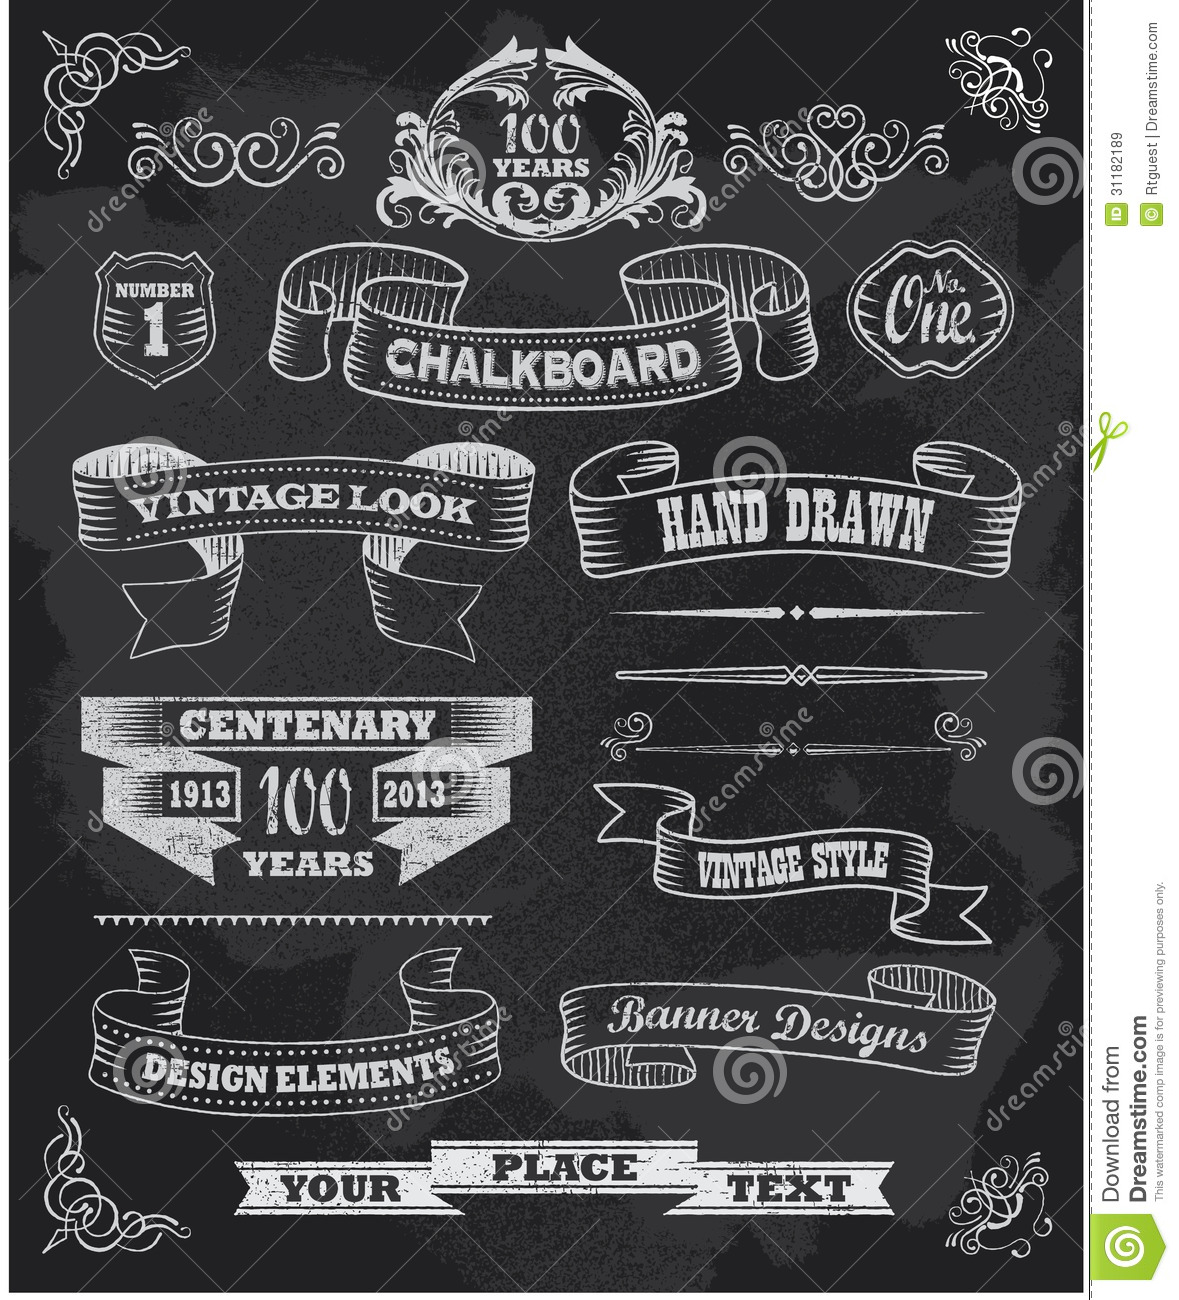 Chalkboard banners and ribbon - Free Chalkboard Clipart